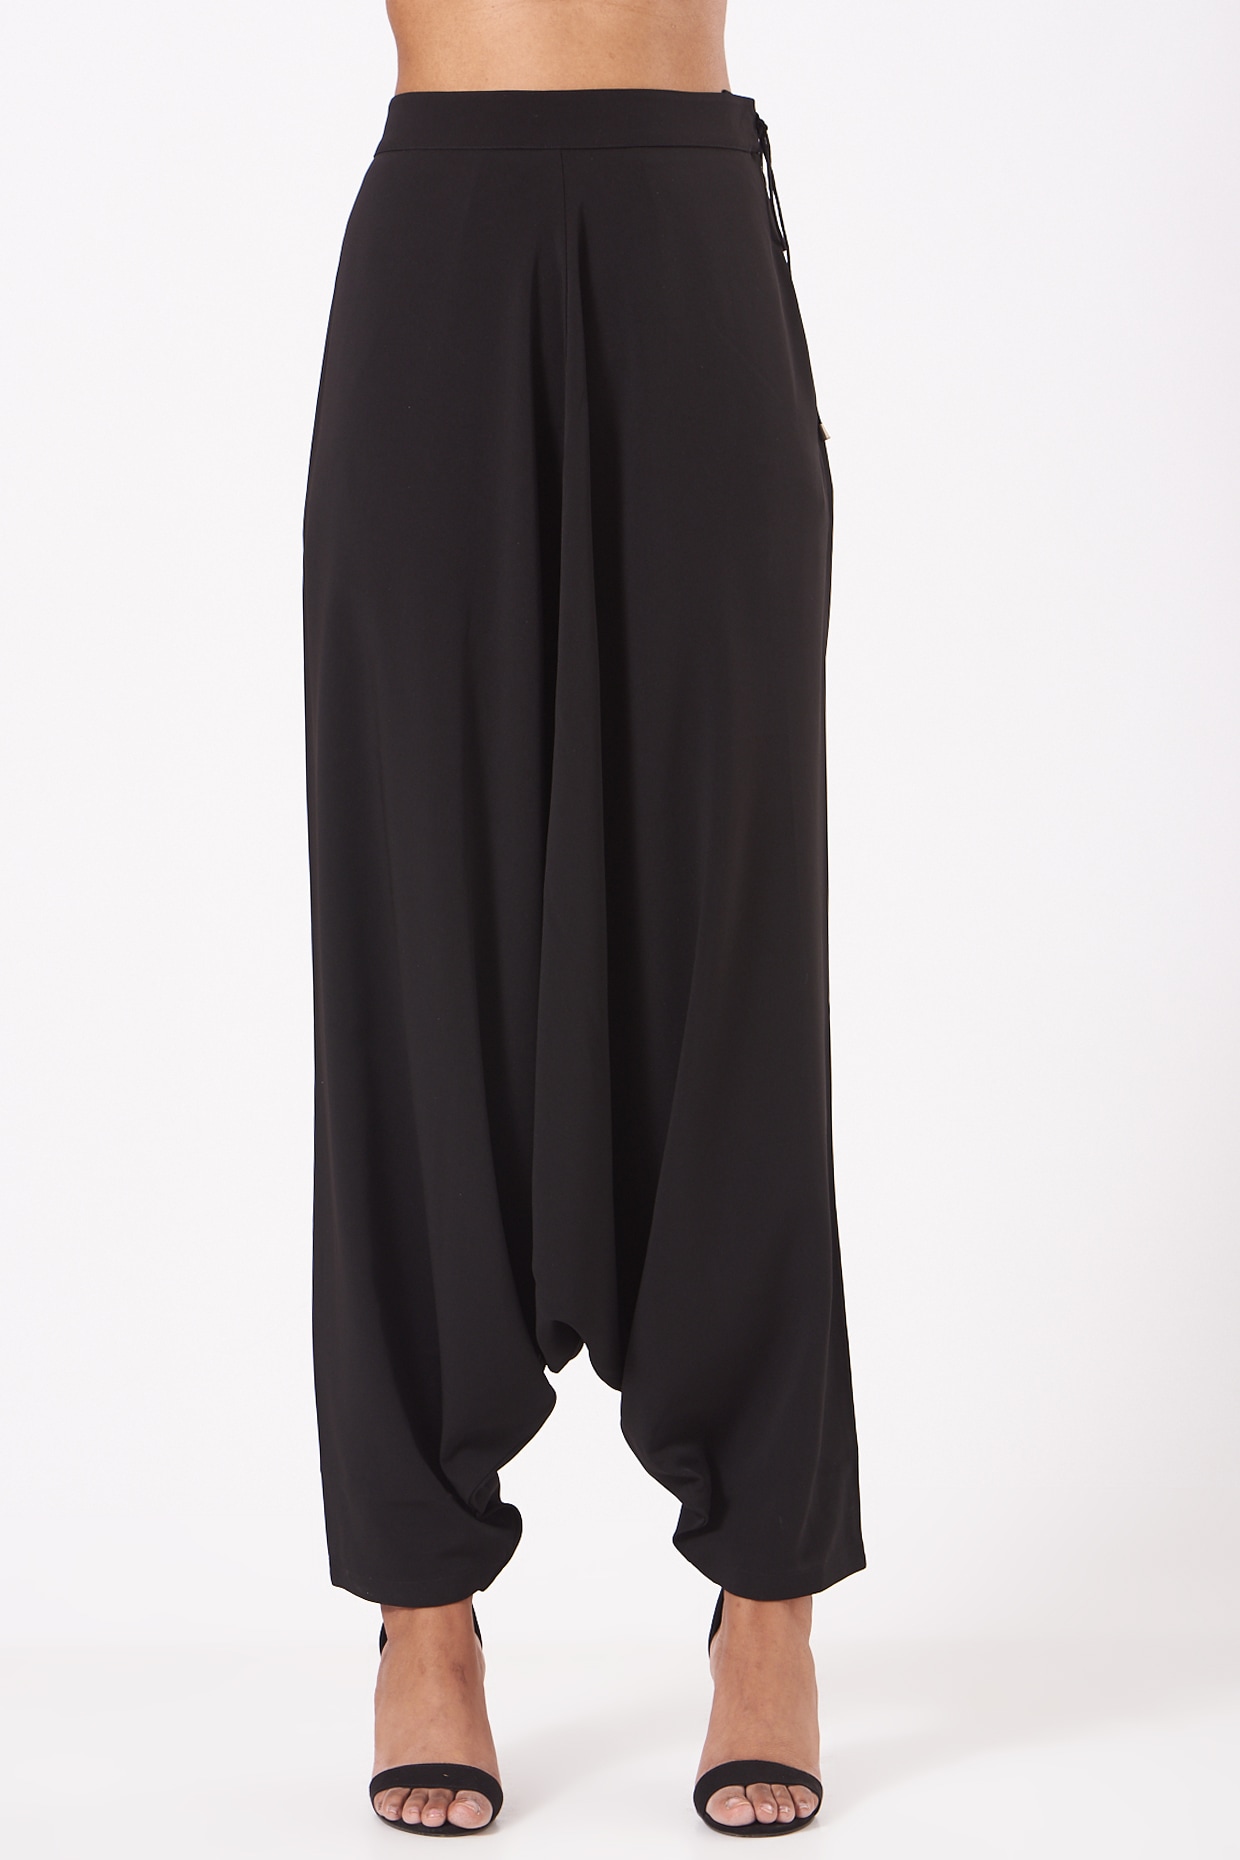 Harem Jersey Pockets Trousers - New In from Yumi UK